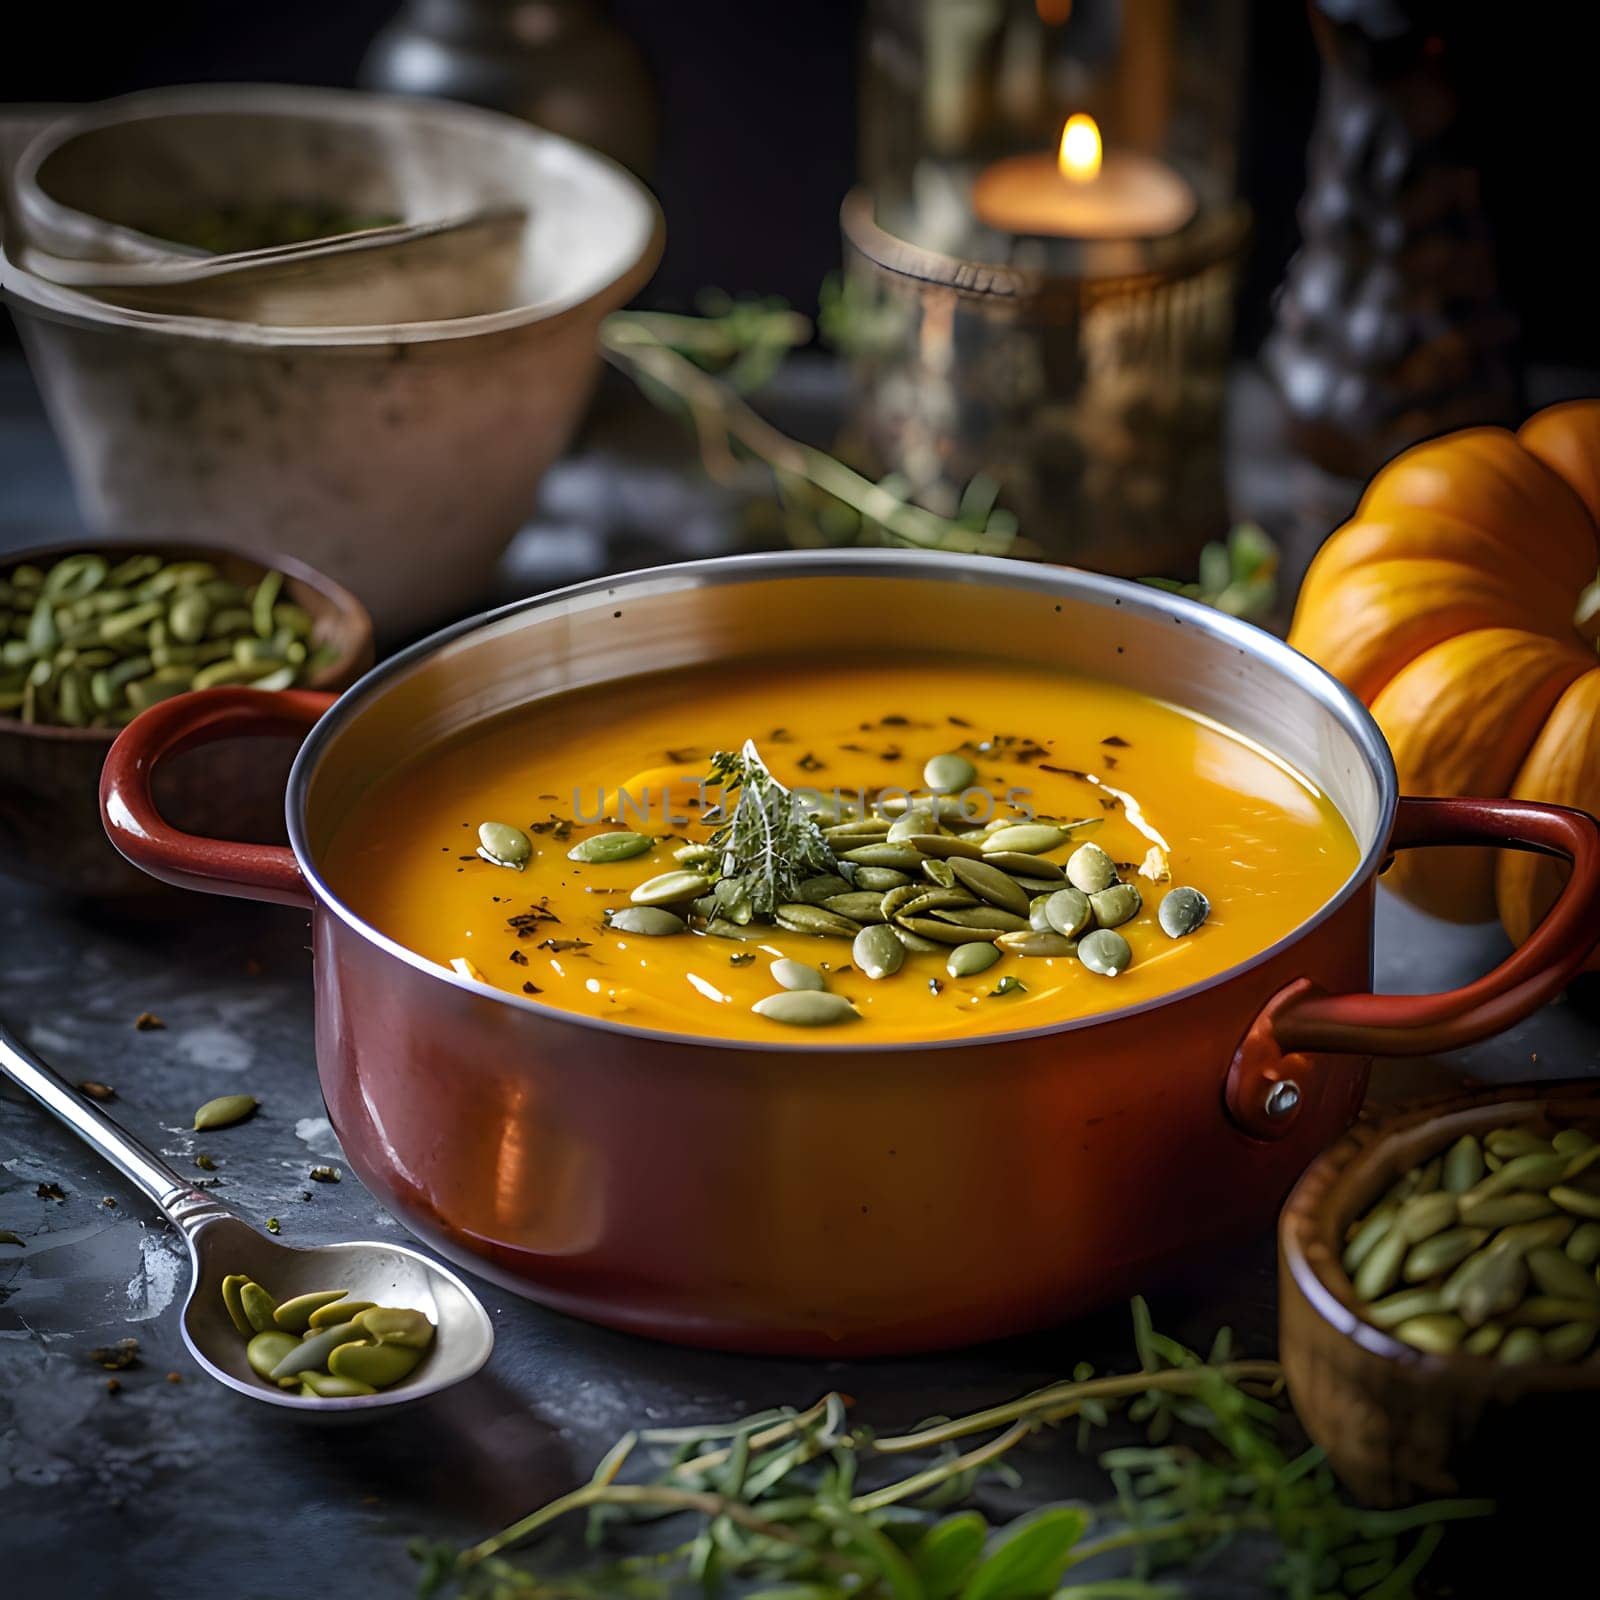 Pumpkin soup in a pot with seeds, around pumpkins, spices. Pumpkin as a dish of thanksgiving for the harvest. by ThemesS